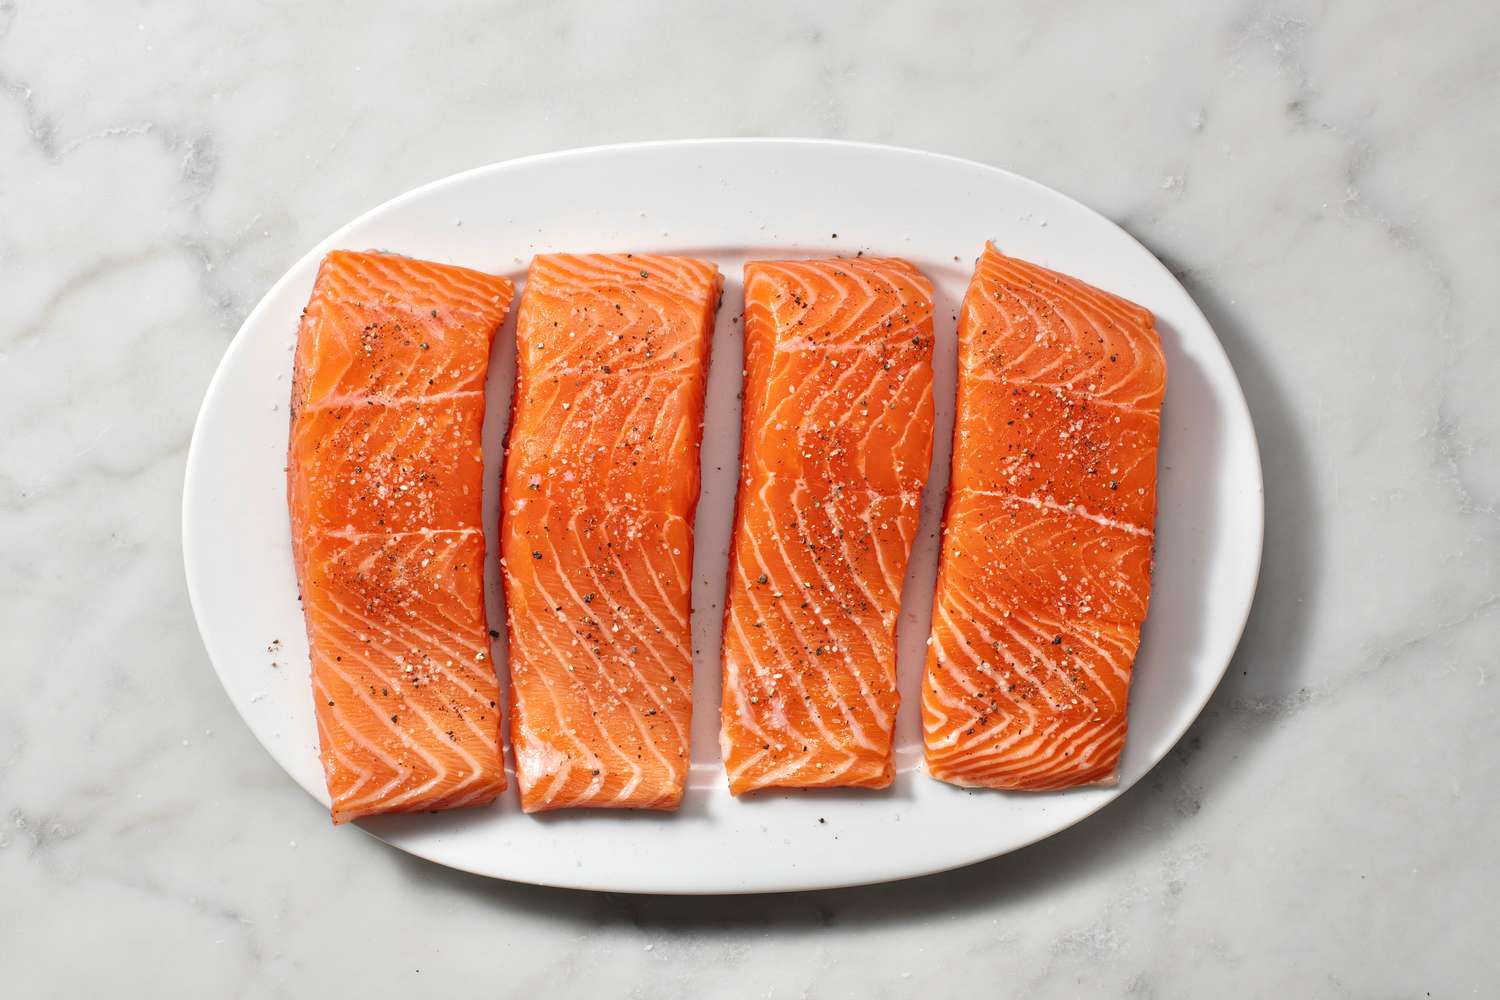 Pieces of salmon on a plate seasoned with salt and pepper